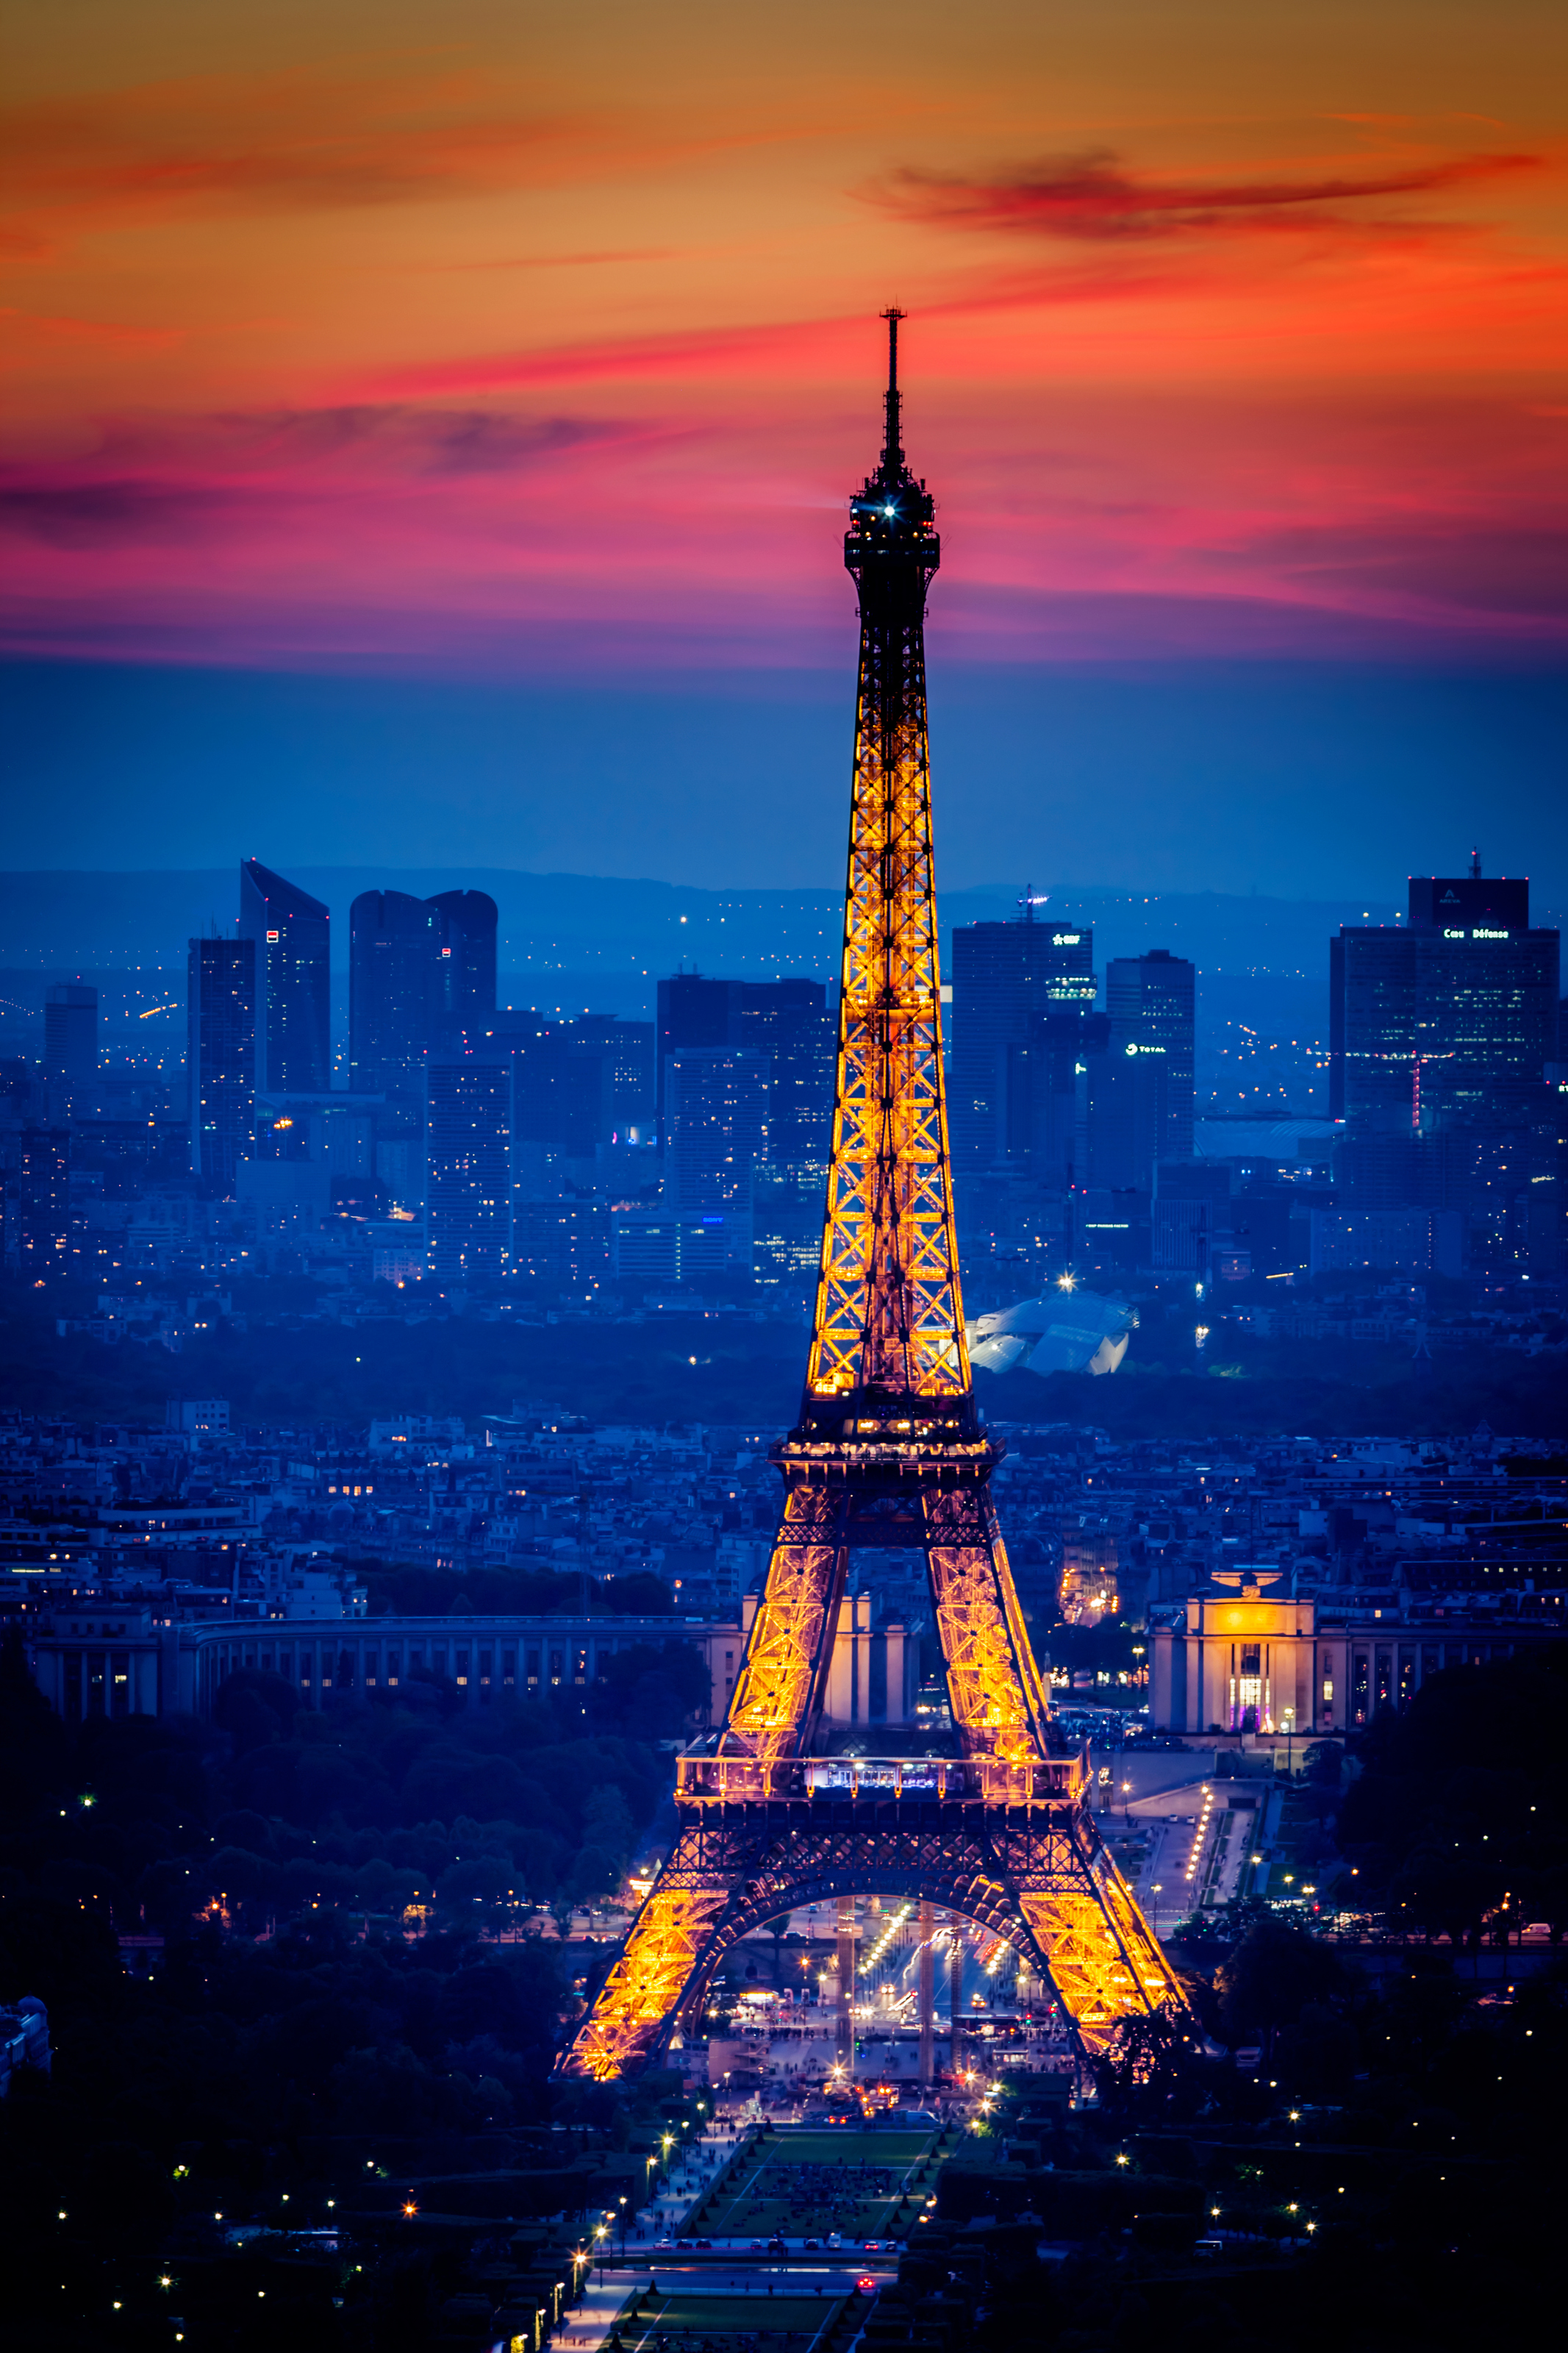 Download wallpaper 1350x2400 eiffel tower city sunset top view paris  france iphone 876s6 for parallax hd background